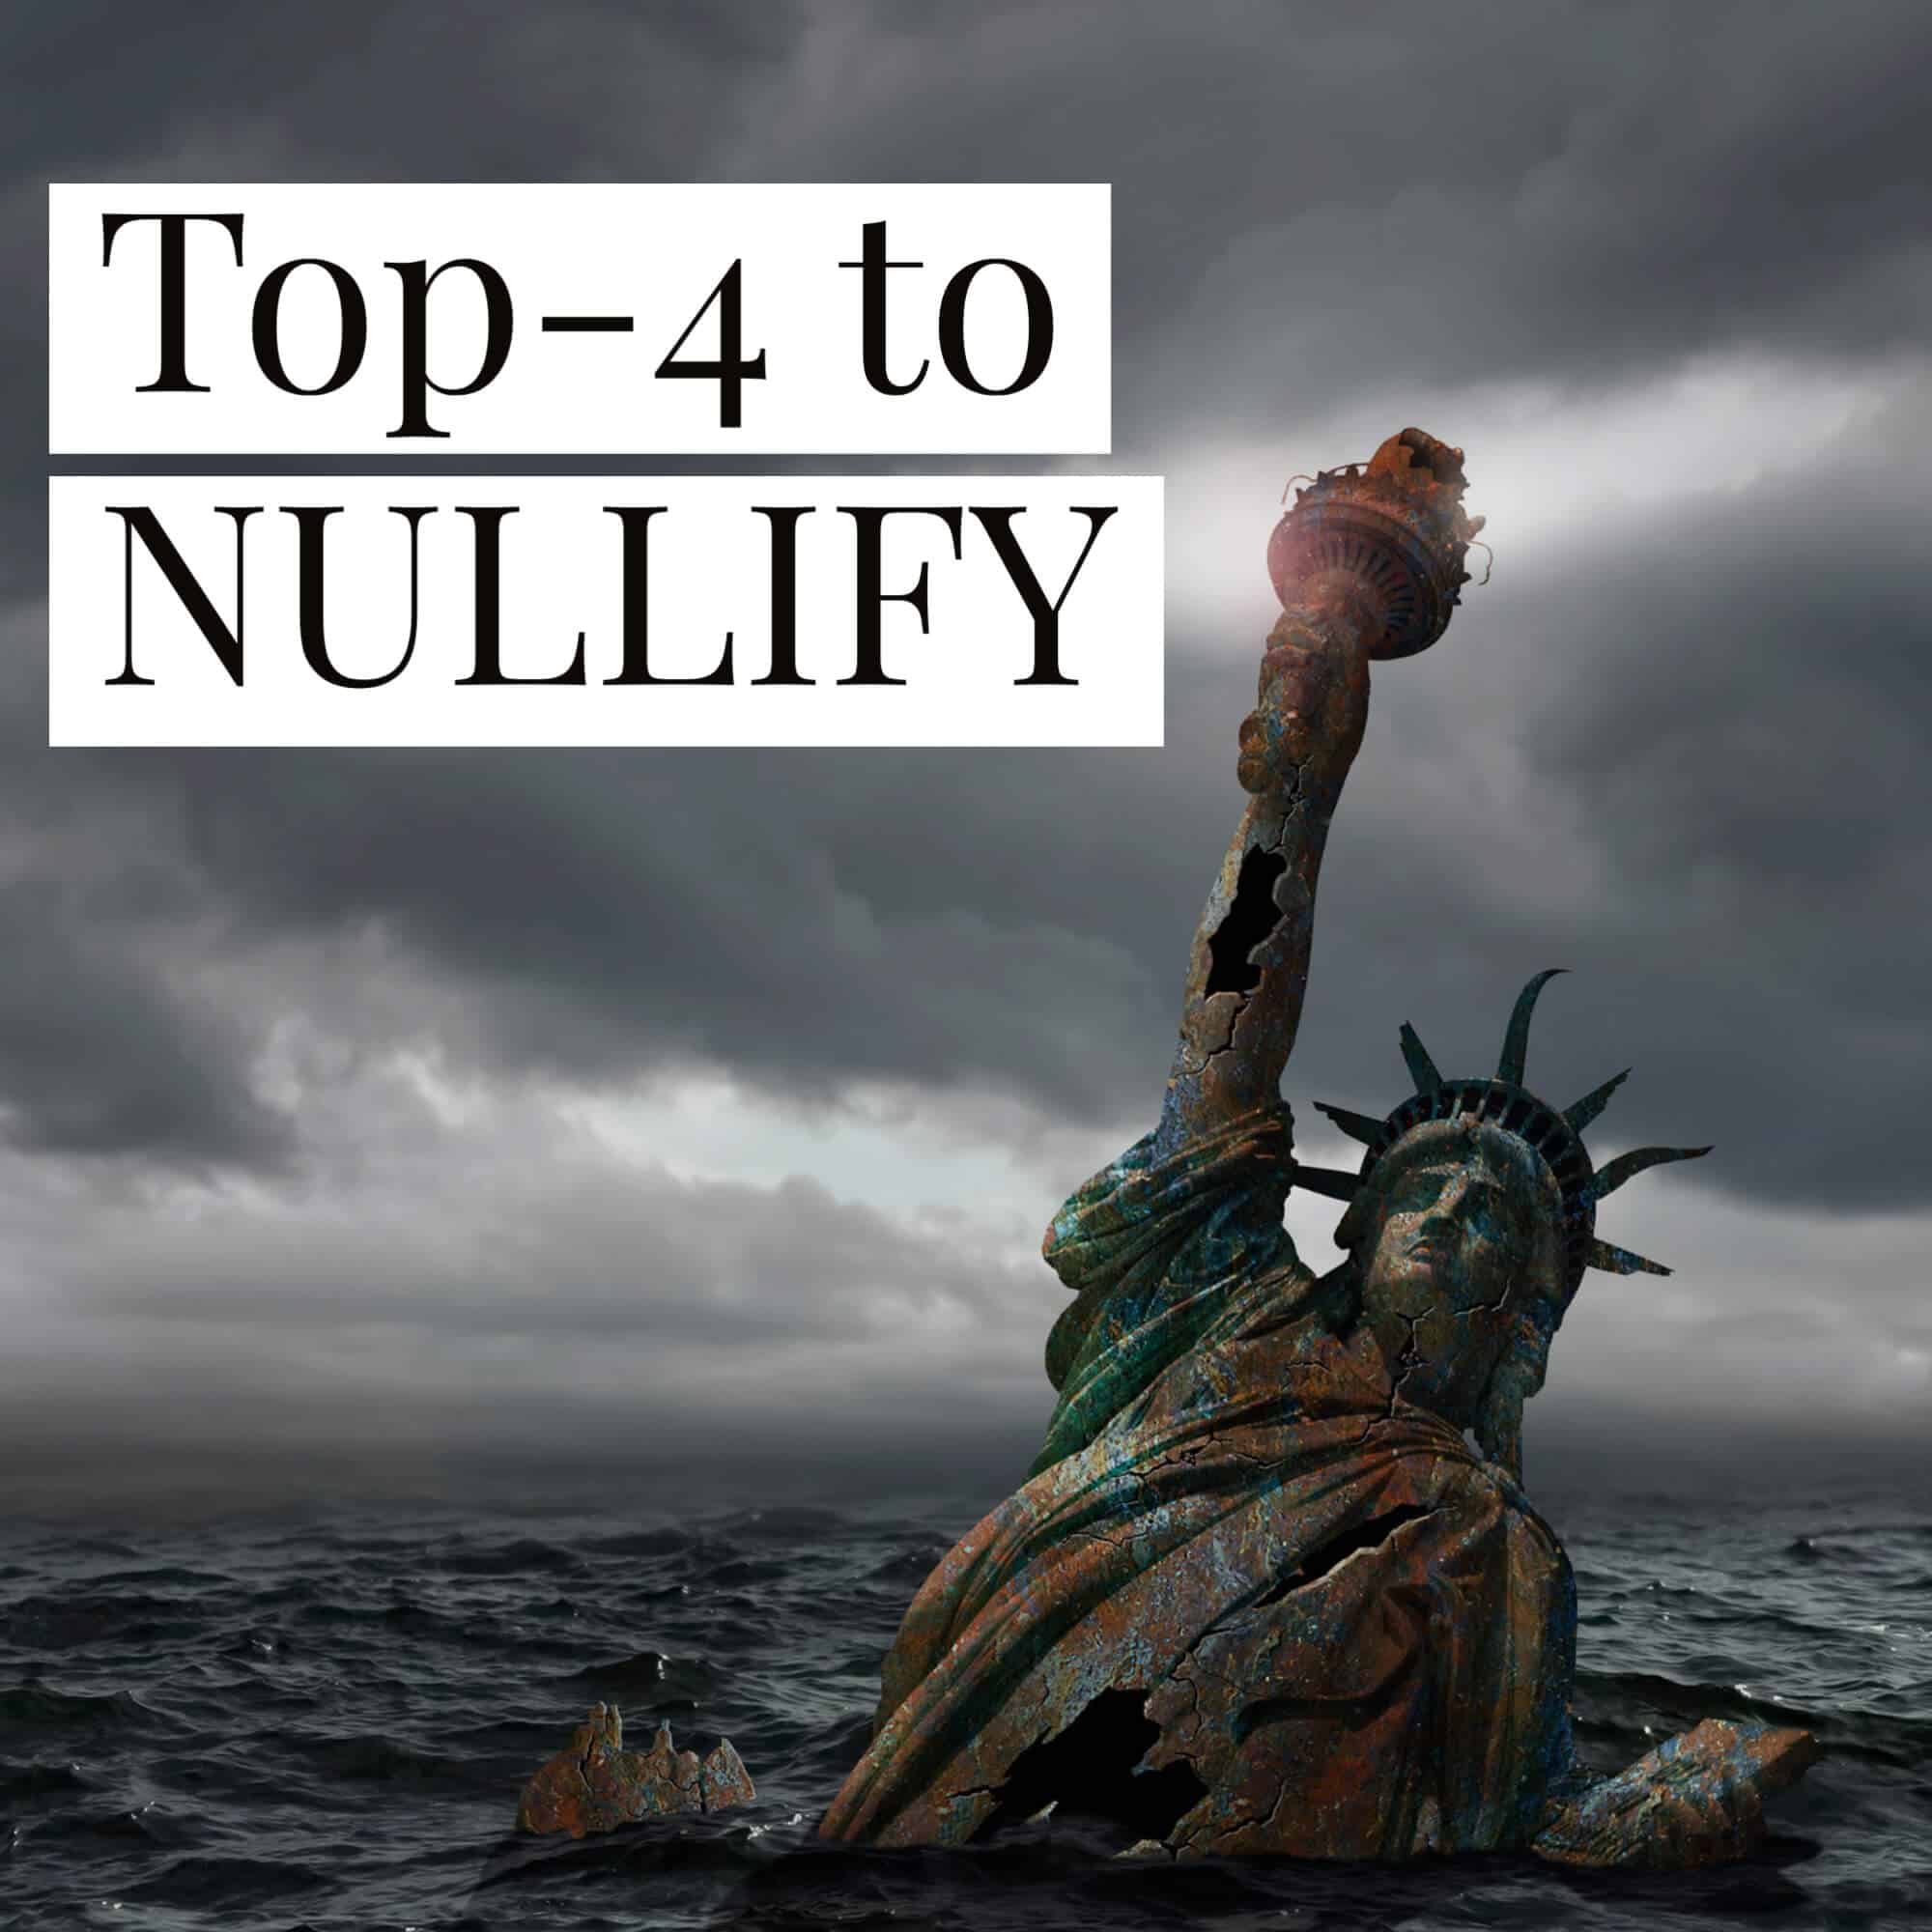 Top-4 to Nullify